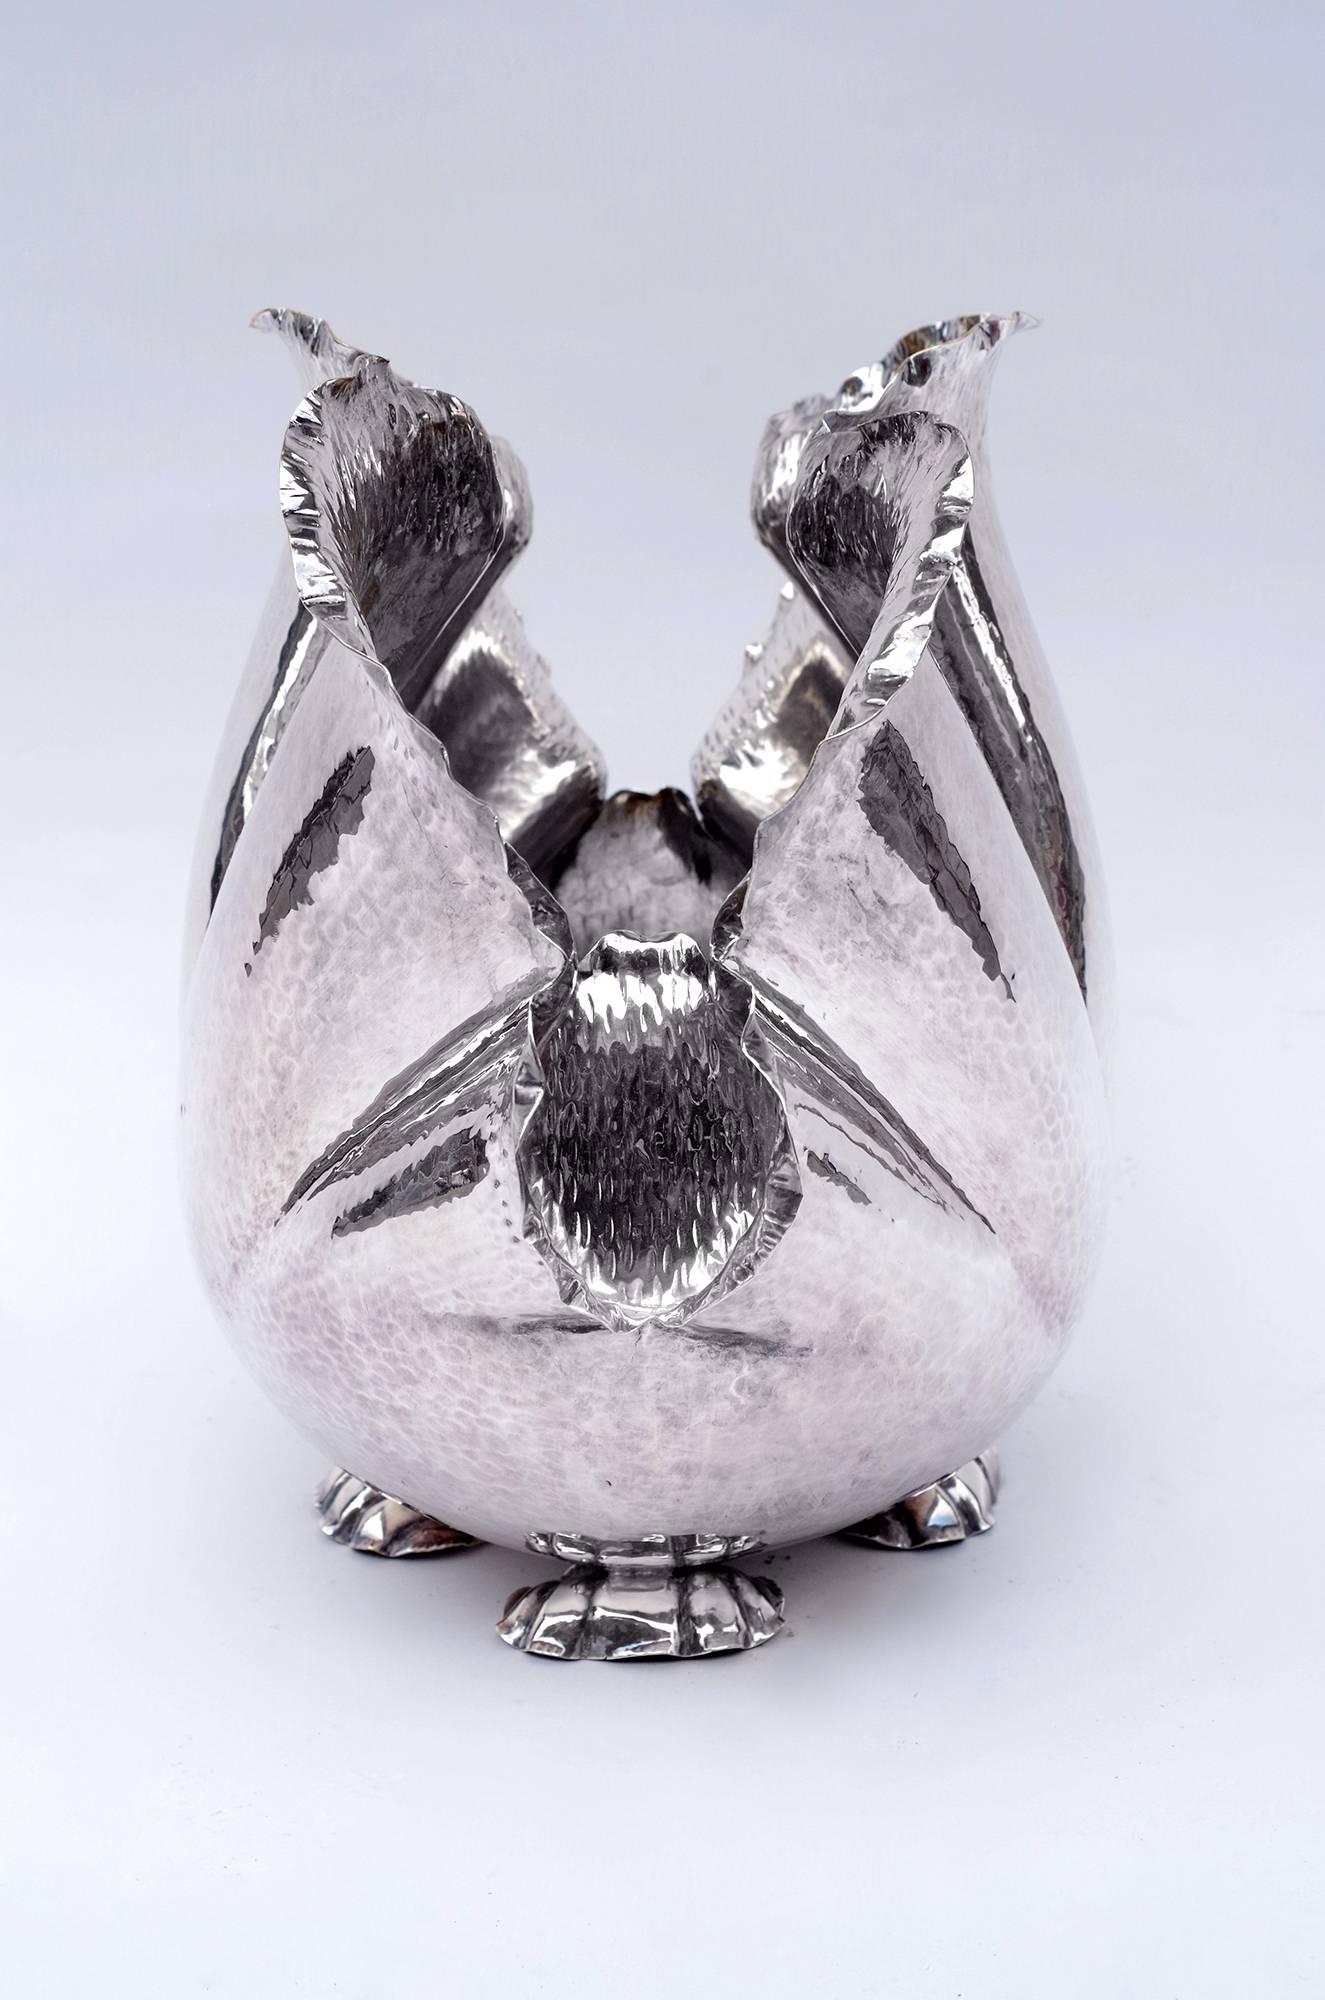 Hammered silver plated wine cooler or champagne bucket, in cabbage shape, designed by the French fashion designer Christian Dior, circa 1970.
The Christian Dior signature is visible below, between the four little legs in shell shape.